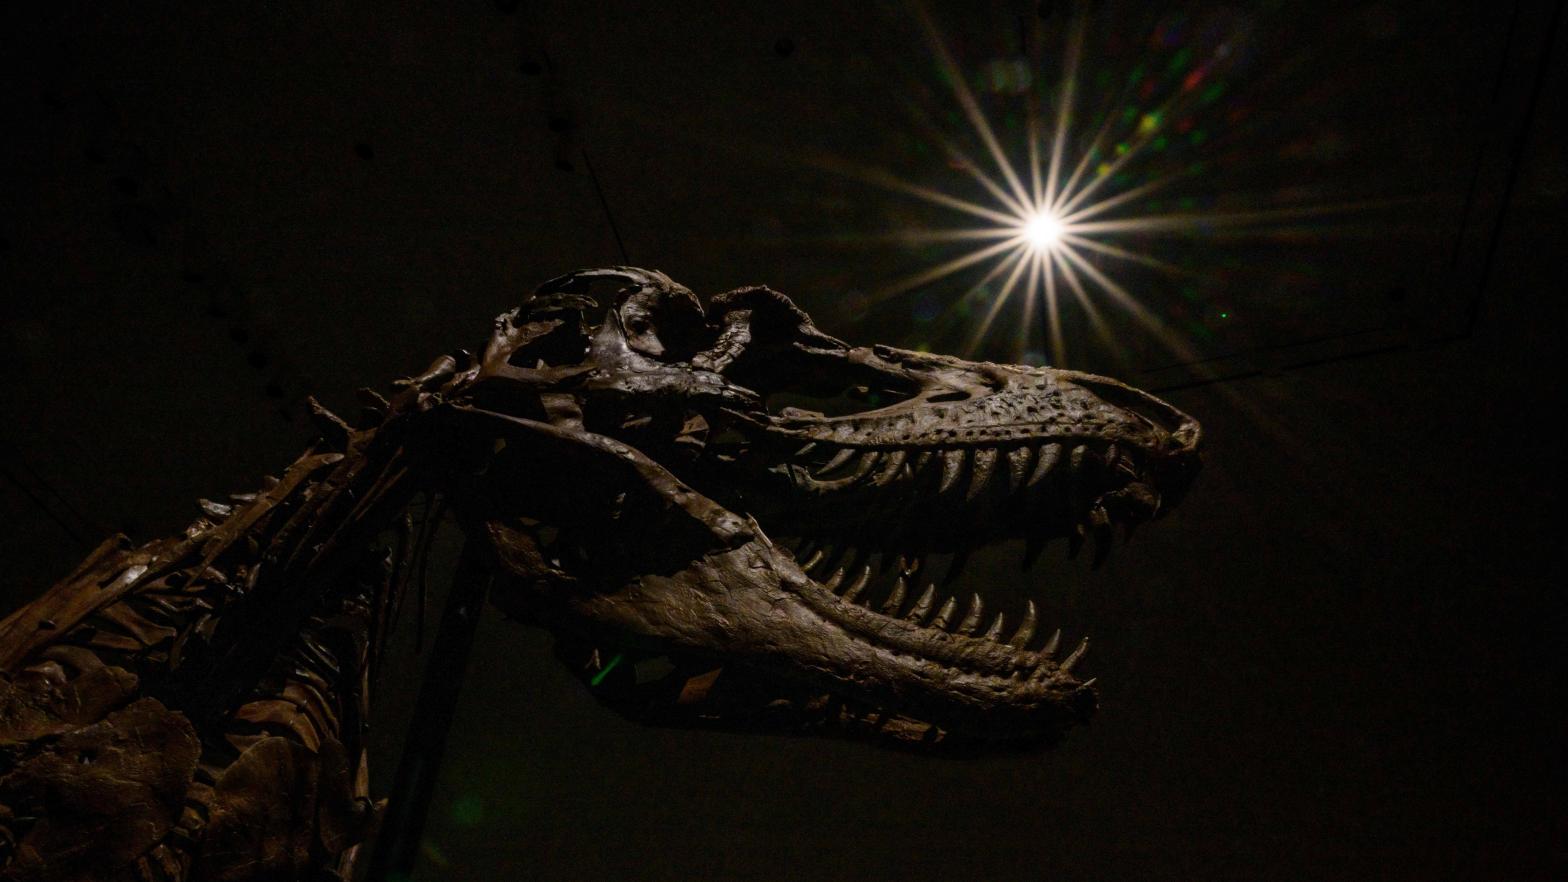 A dinosaur skeleton at auction. (Photo: ANGELA WEISS / AFP, Getty Images)